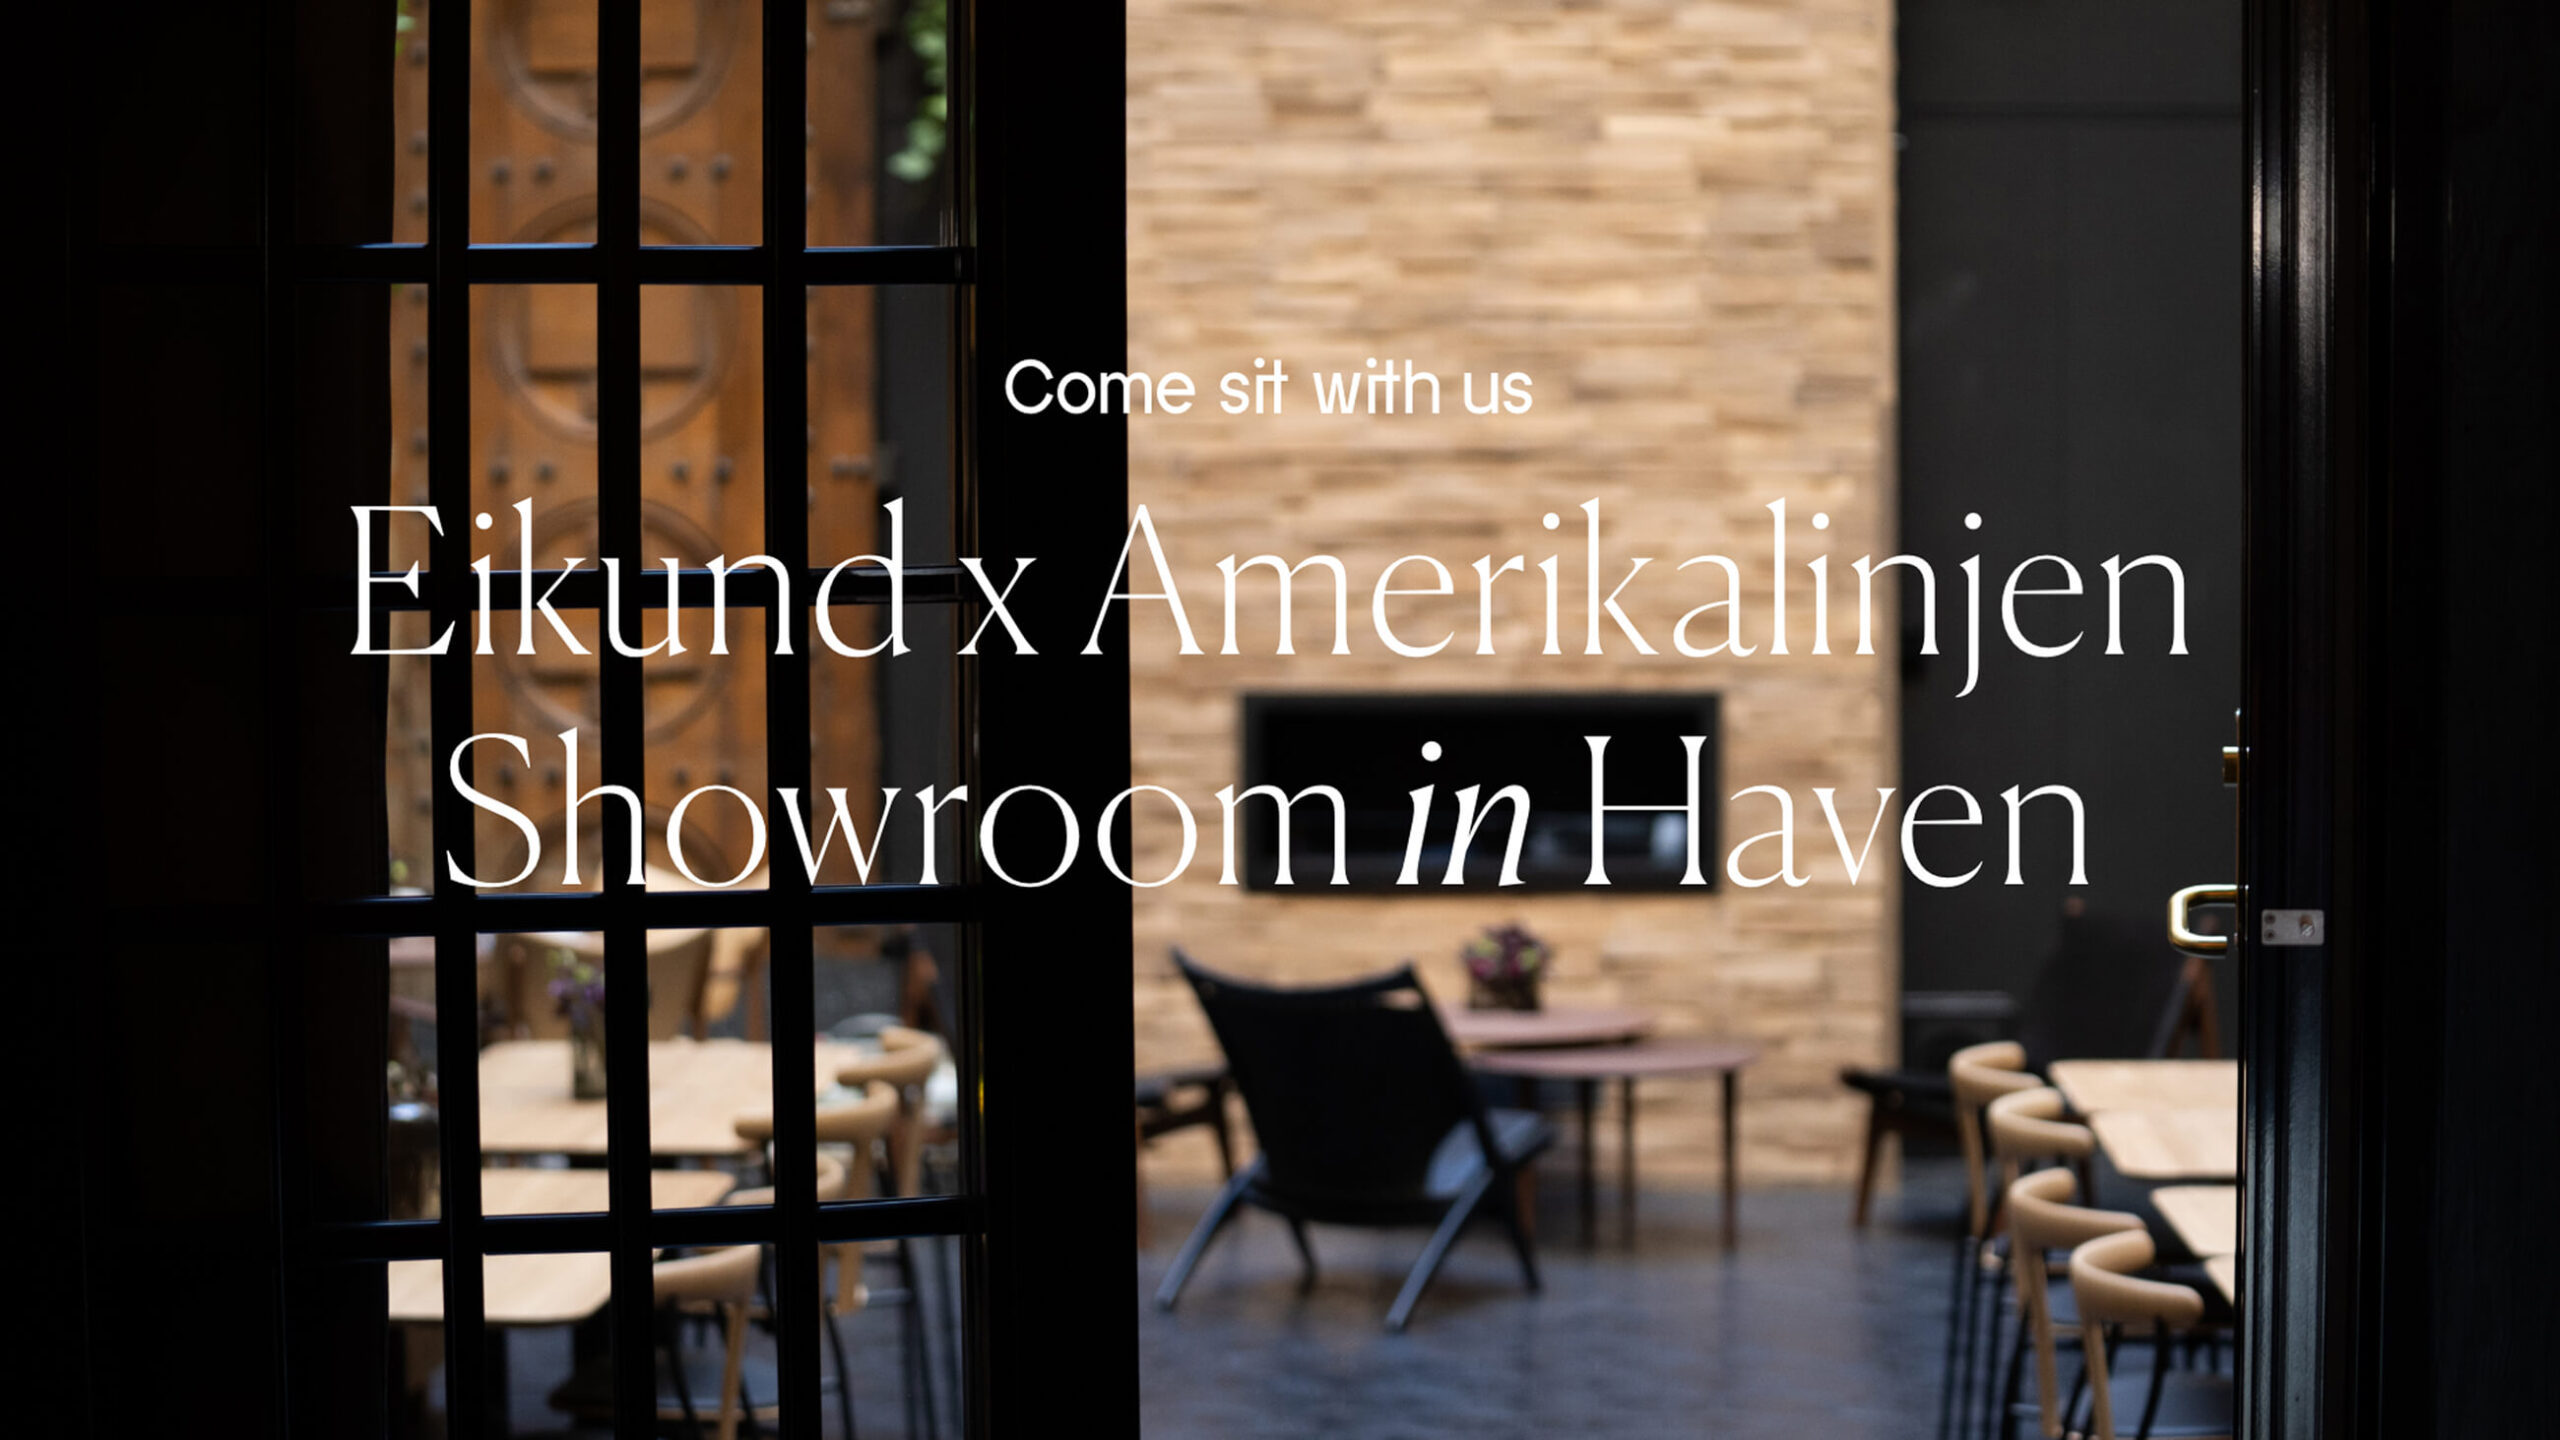 Press release – Welcome to our new Showroom in Haven at Amerikalinjen in Oslo